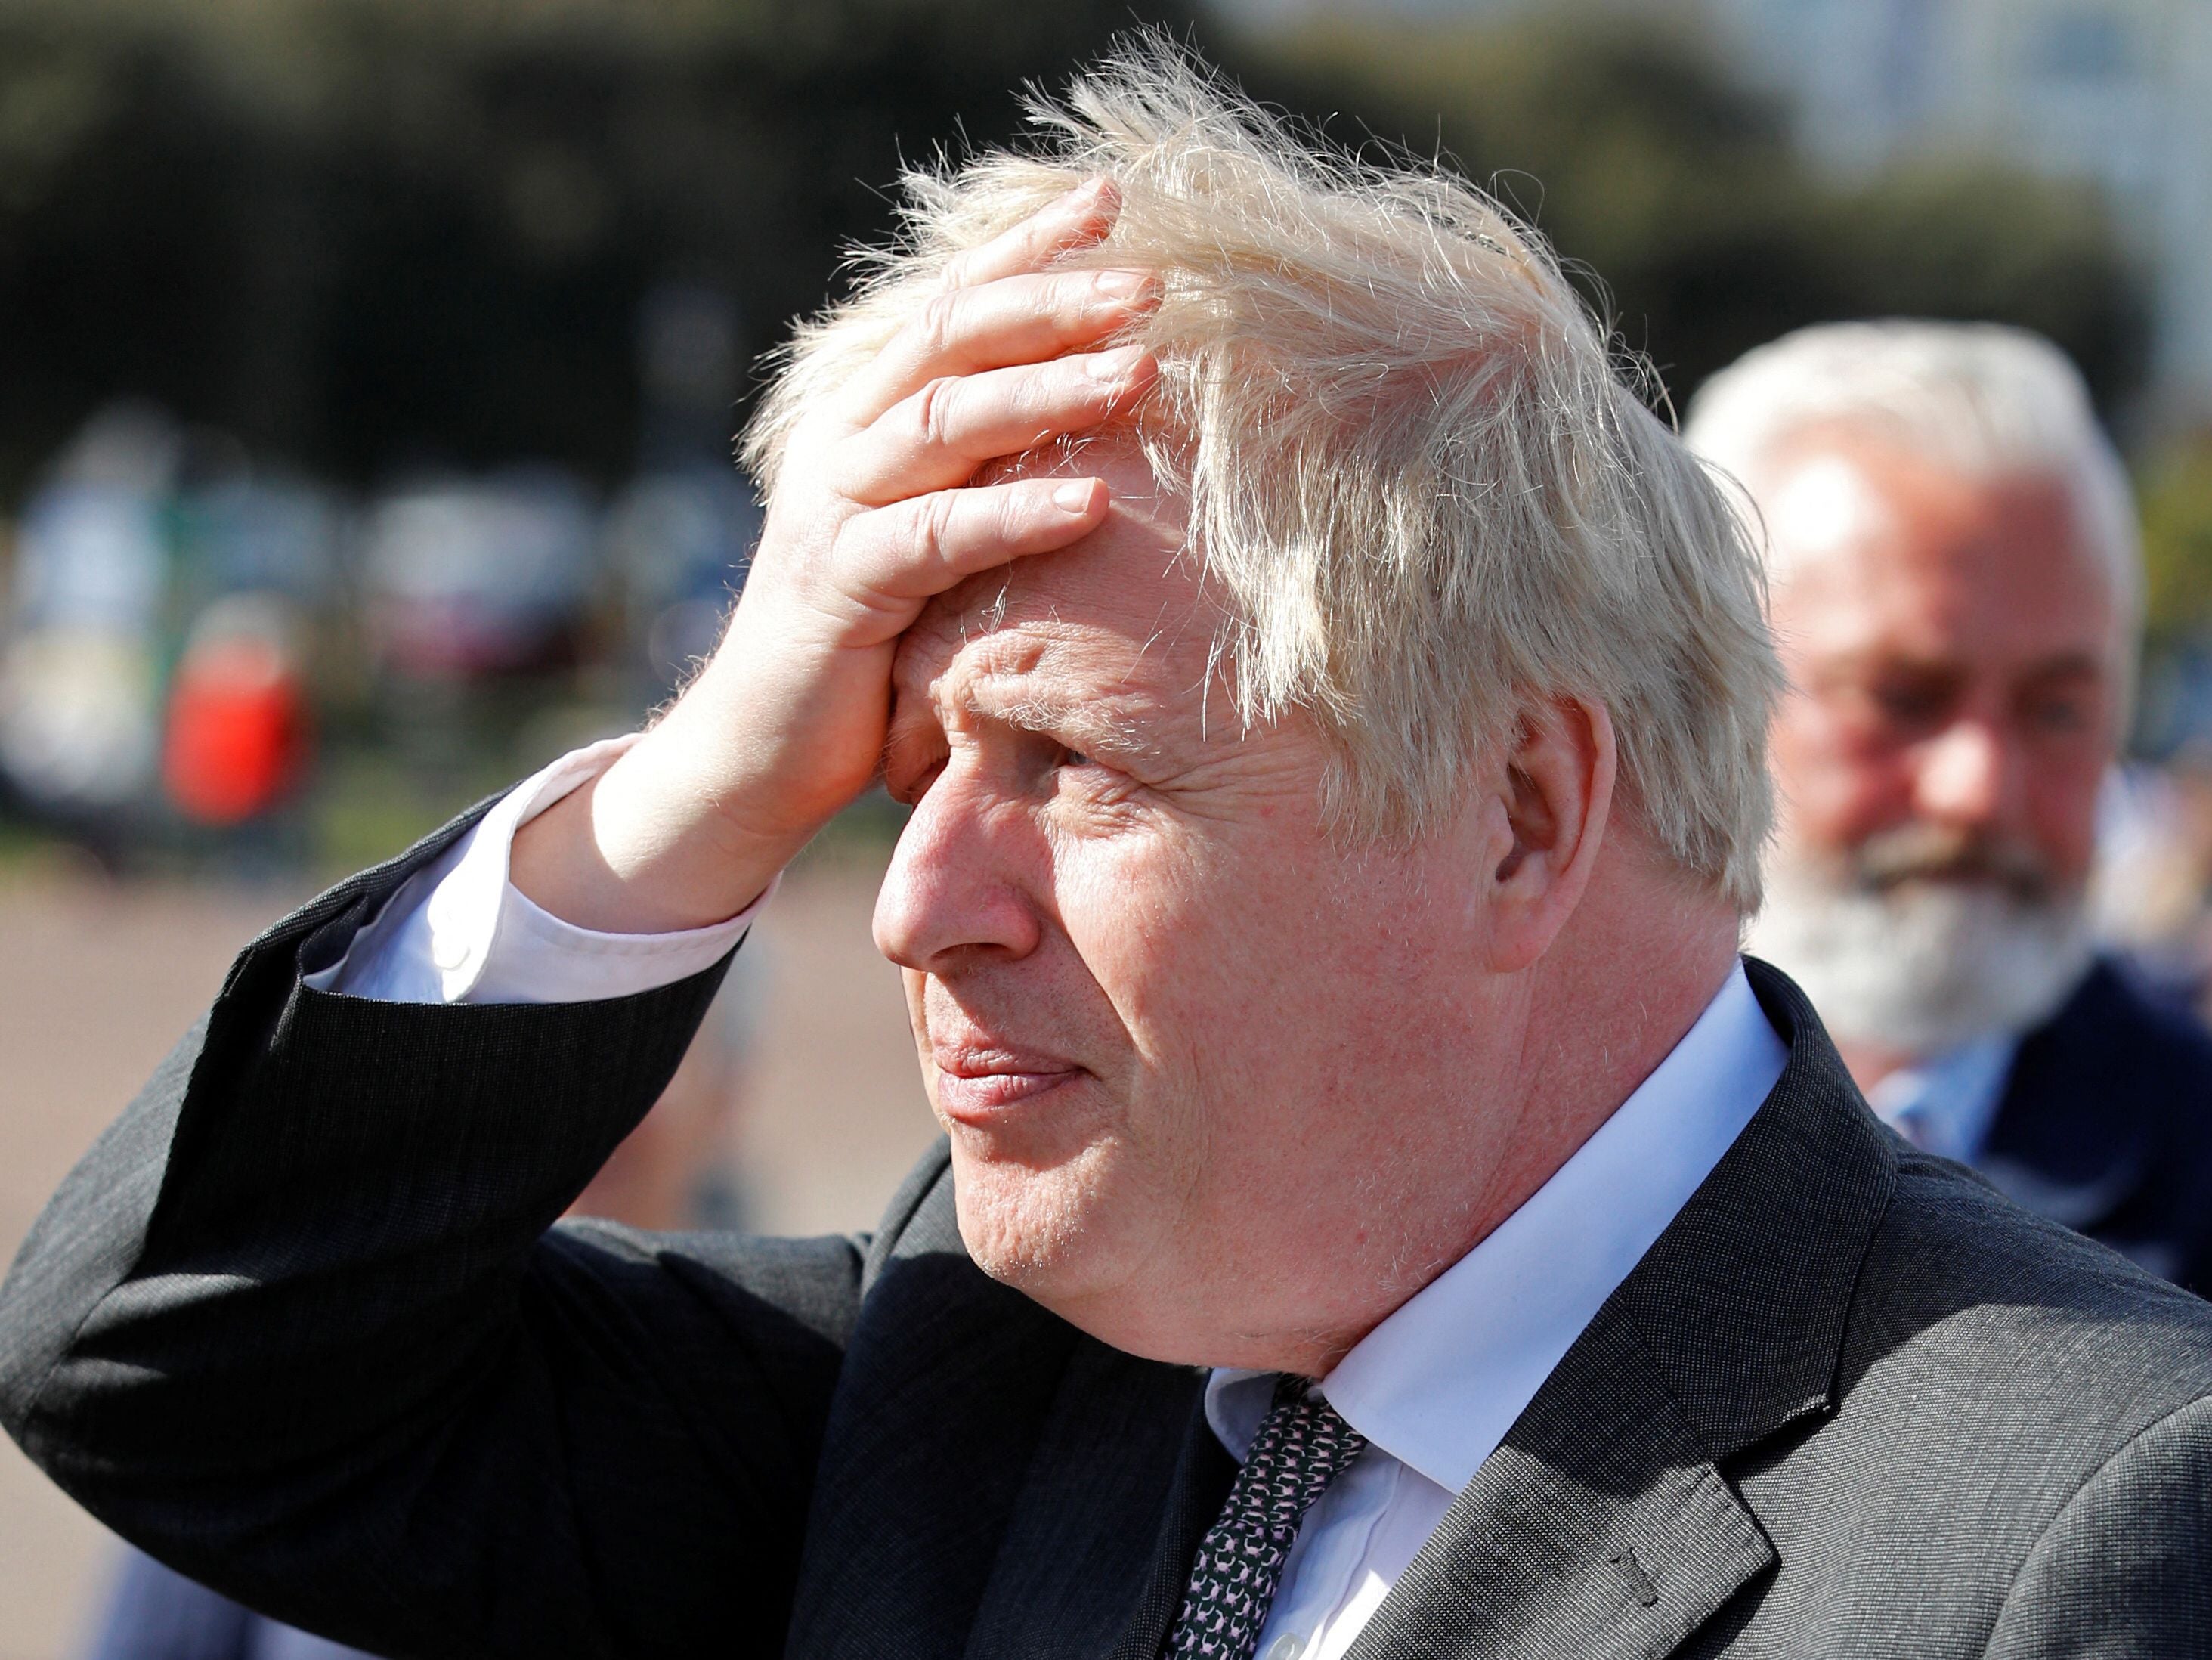 Political headache: Johnson needs to make a better job of his cover story